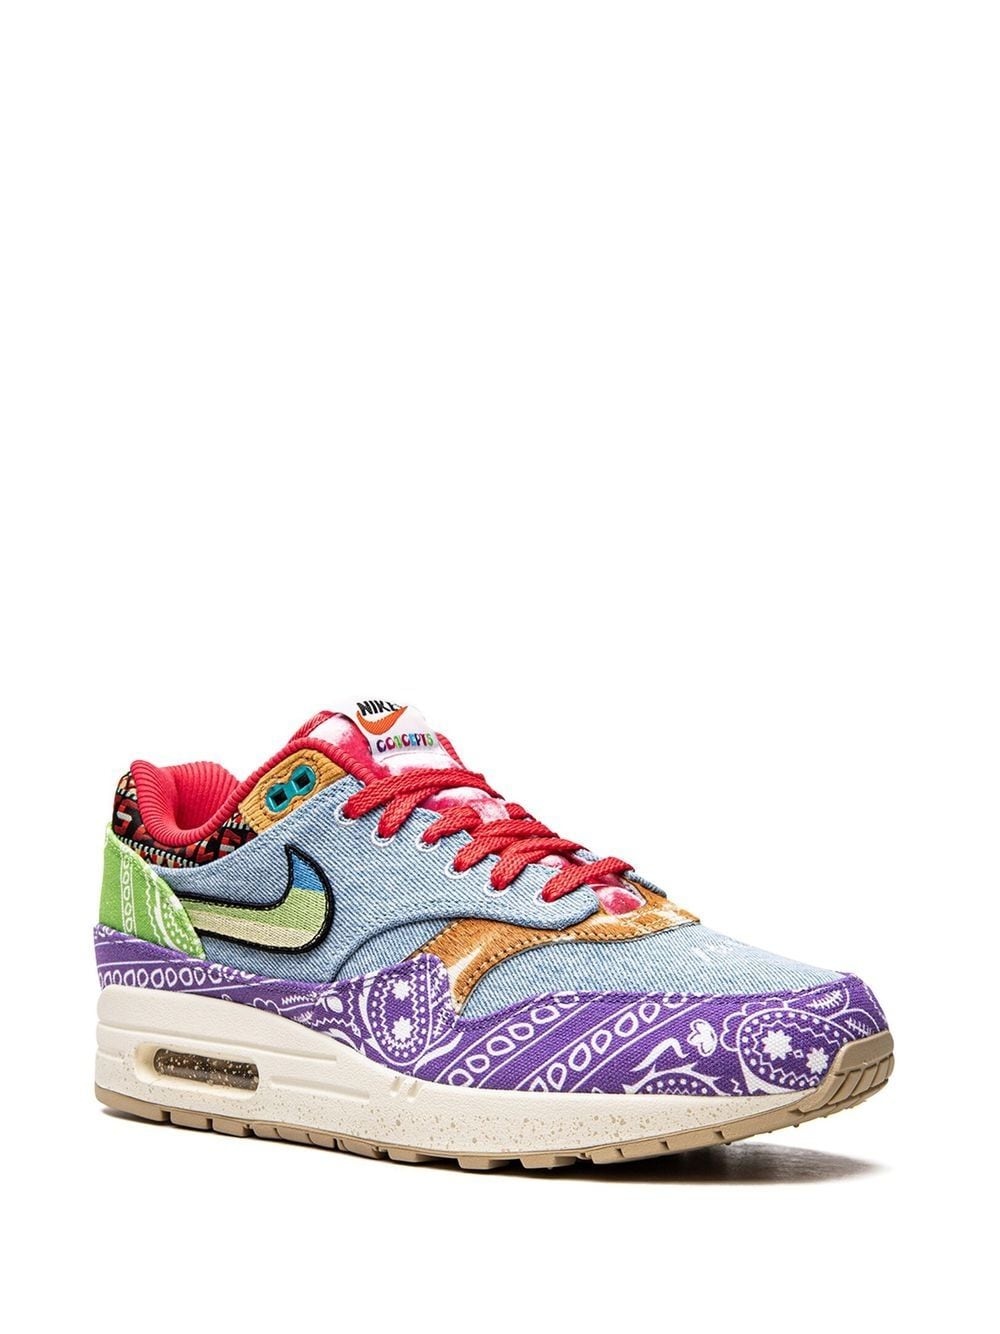 x Concepts Air Max 1 SP "Wild Violet - Special Box" sneakers - 2